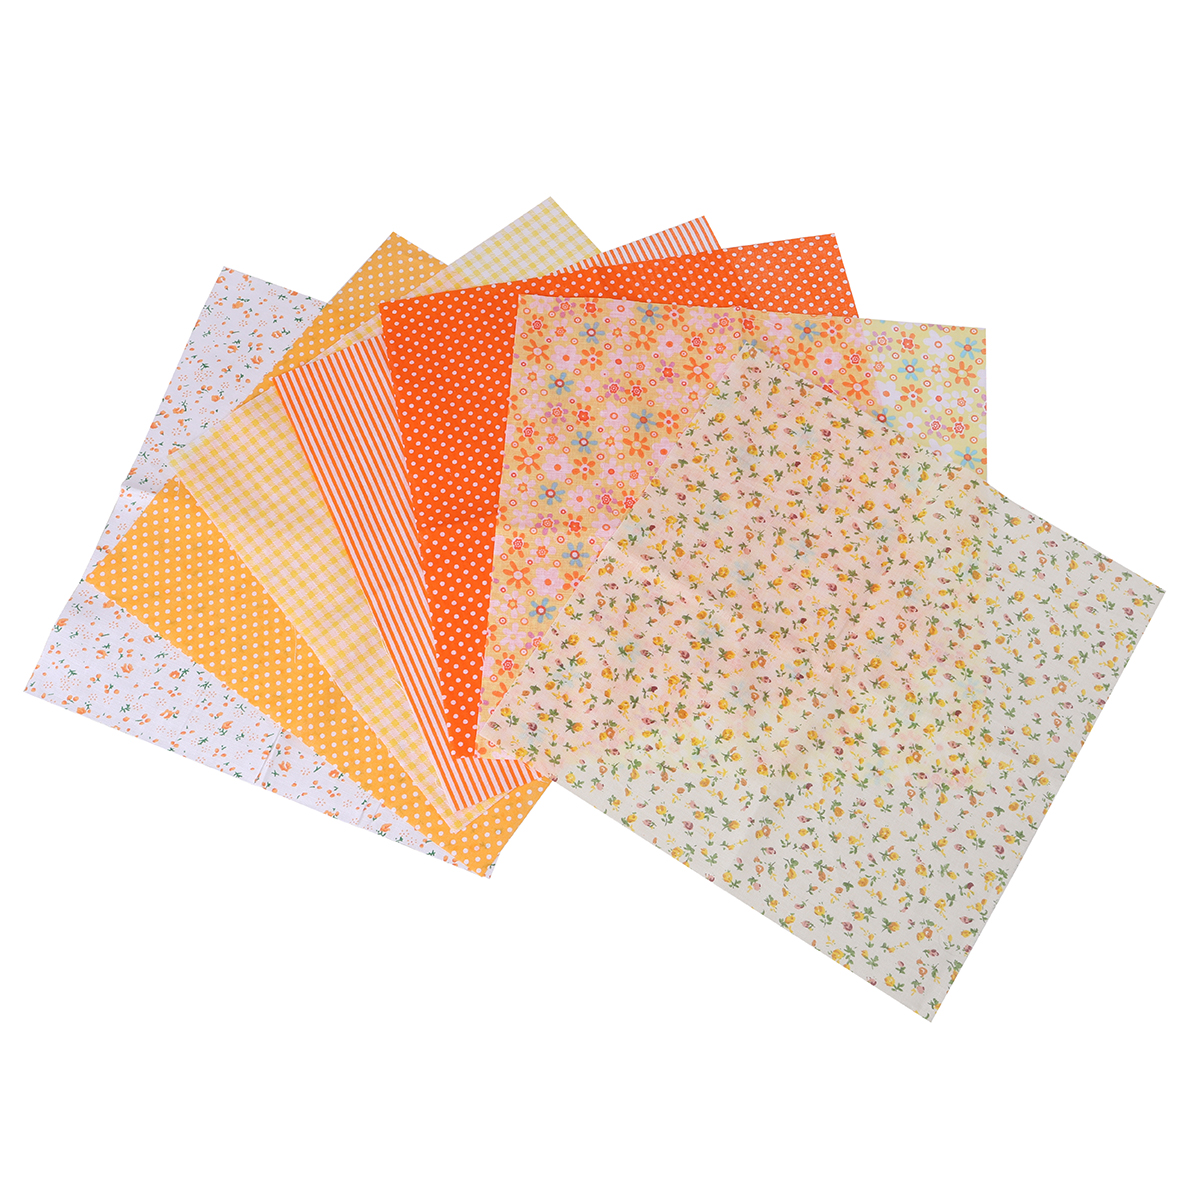 Find 7Pcs Cotton Fabric Patchwork Fat Quarter Bundle DIY Sewing Fabrics Cloths Crafts for Sale on Gipsybee.com with cryptocurrencies